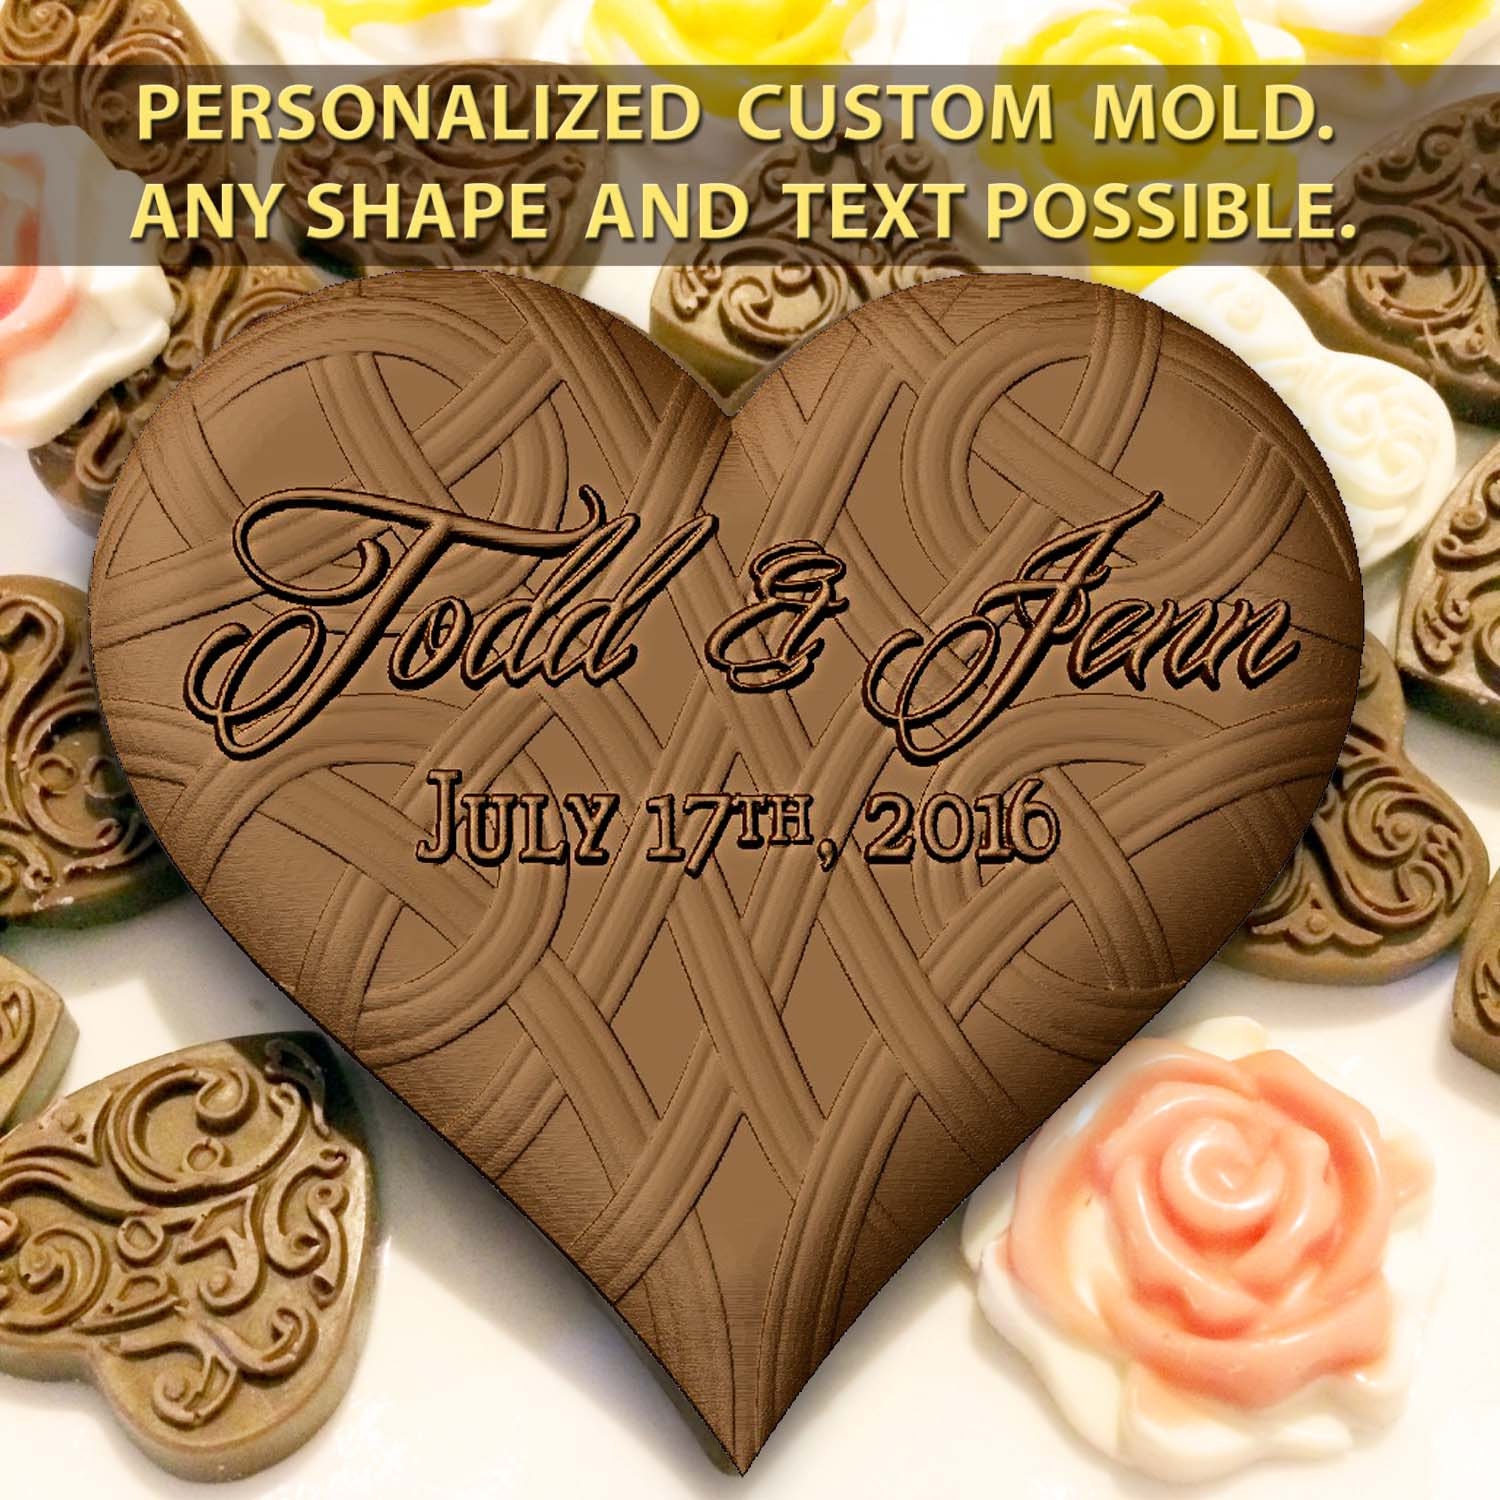 VALENTINE'S DAY CANDY SILICONE MOLD ASSORTMENT [Your choice]